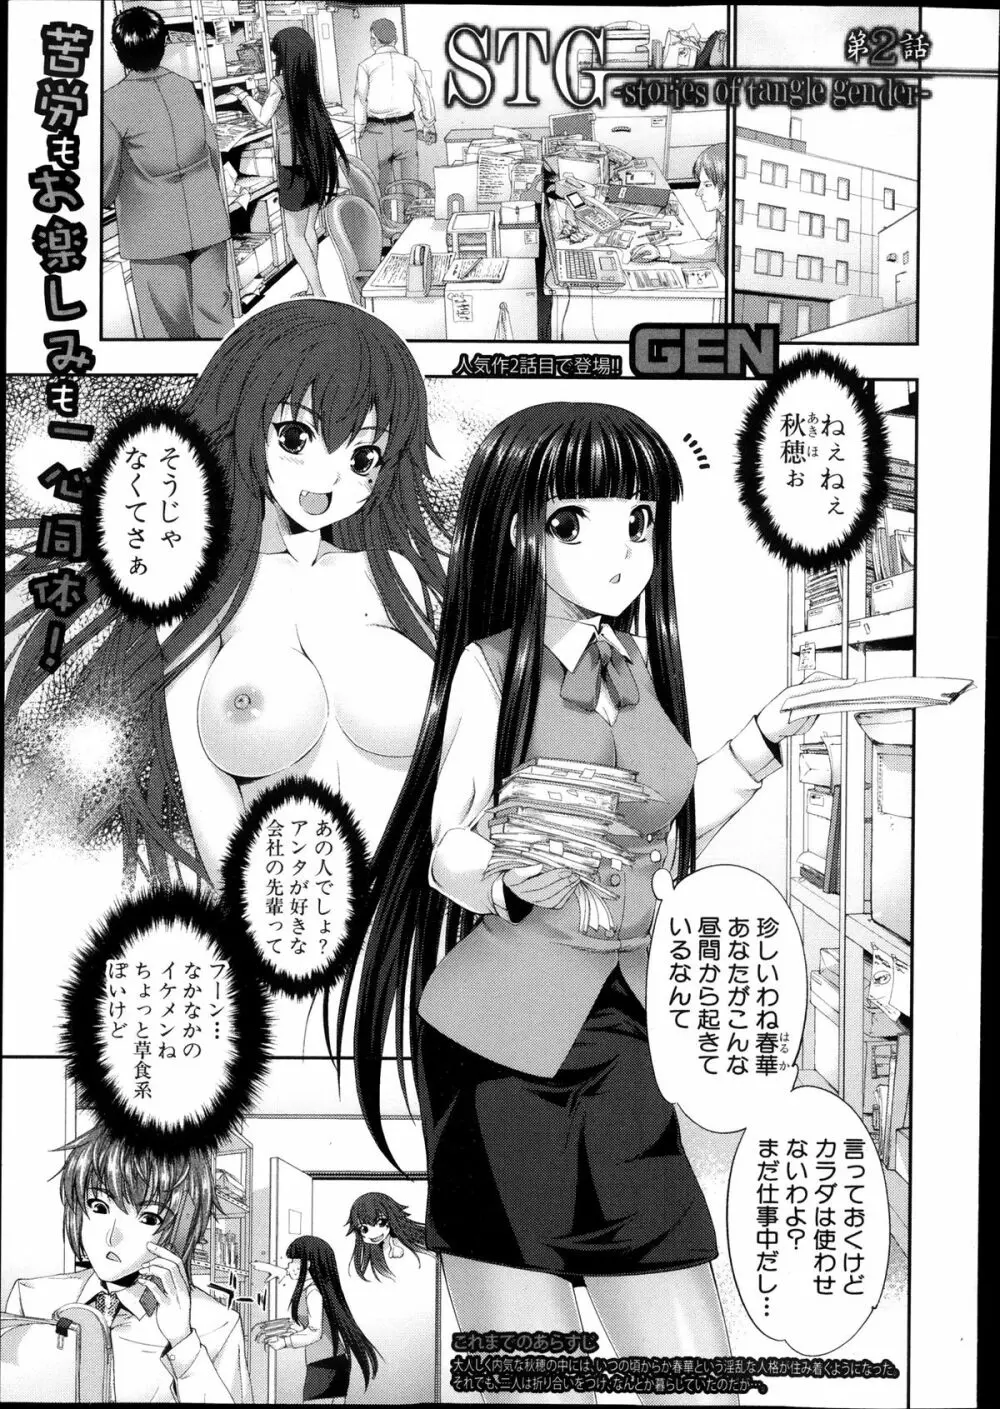 STG 第1-3章 Page.29